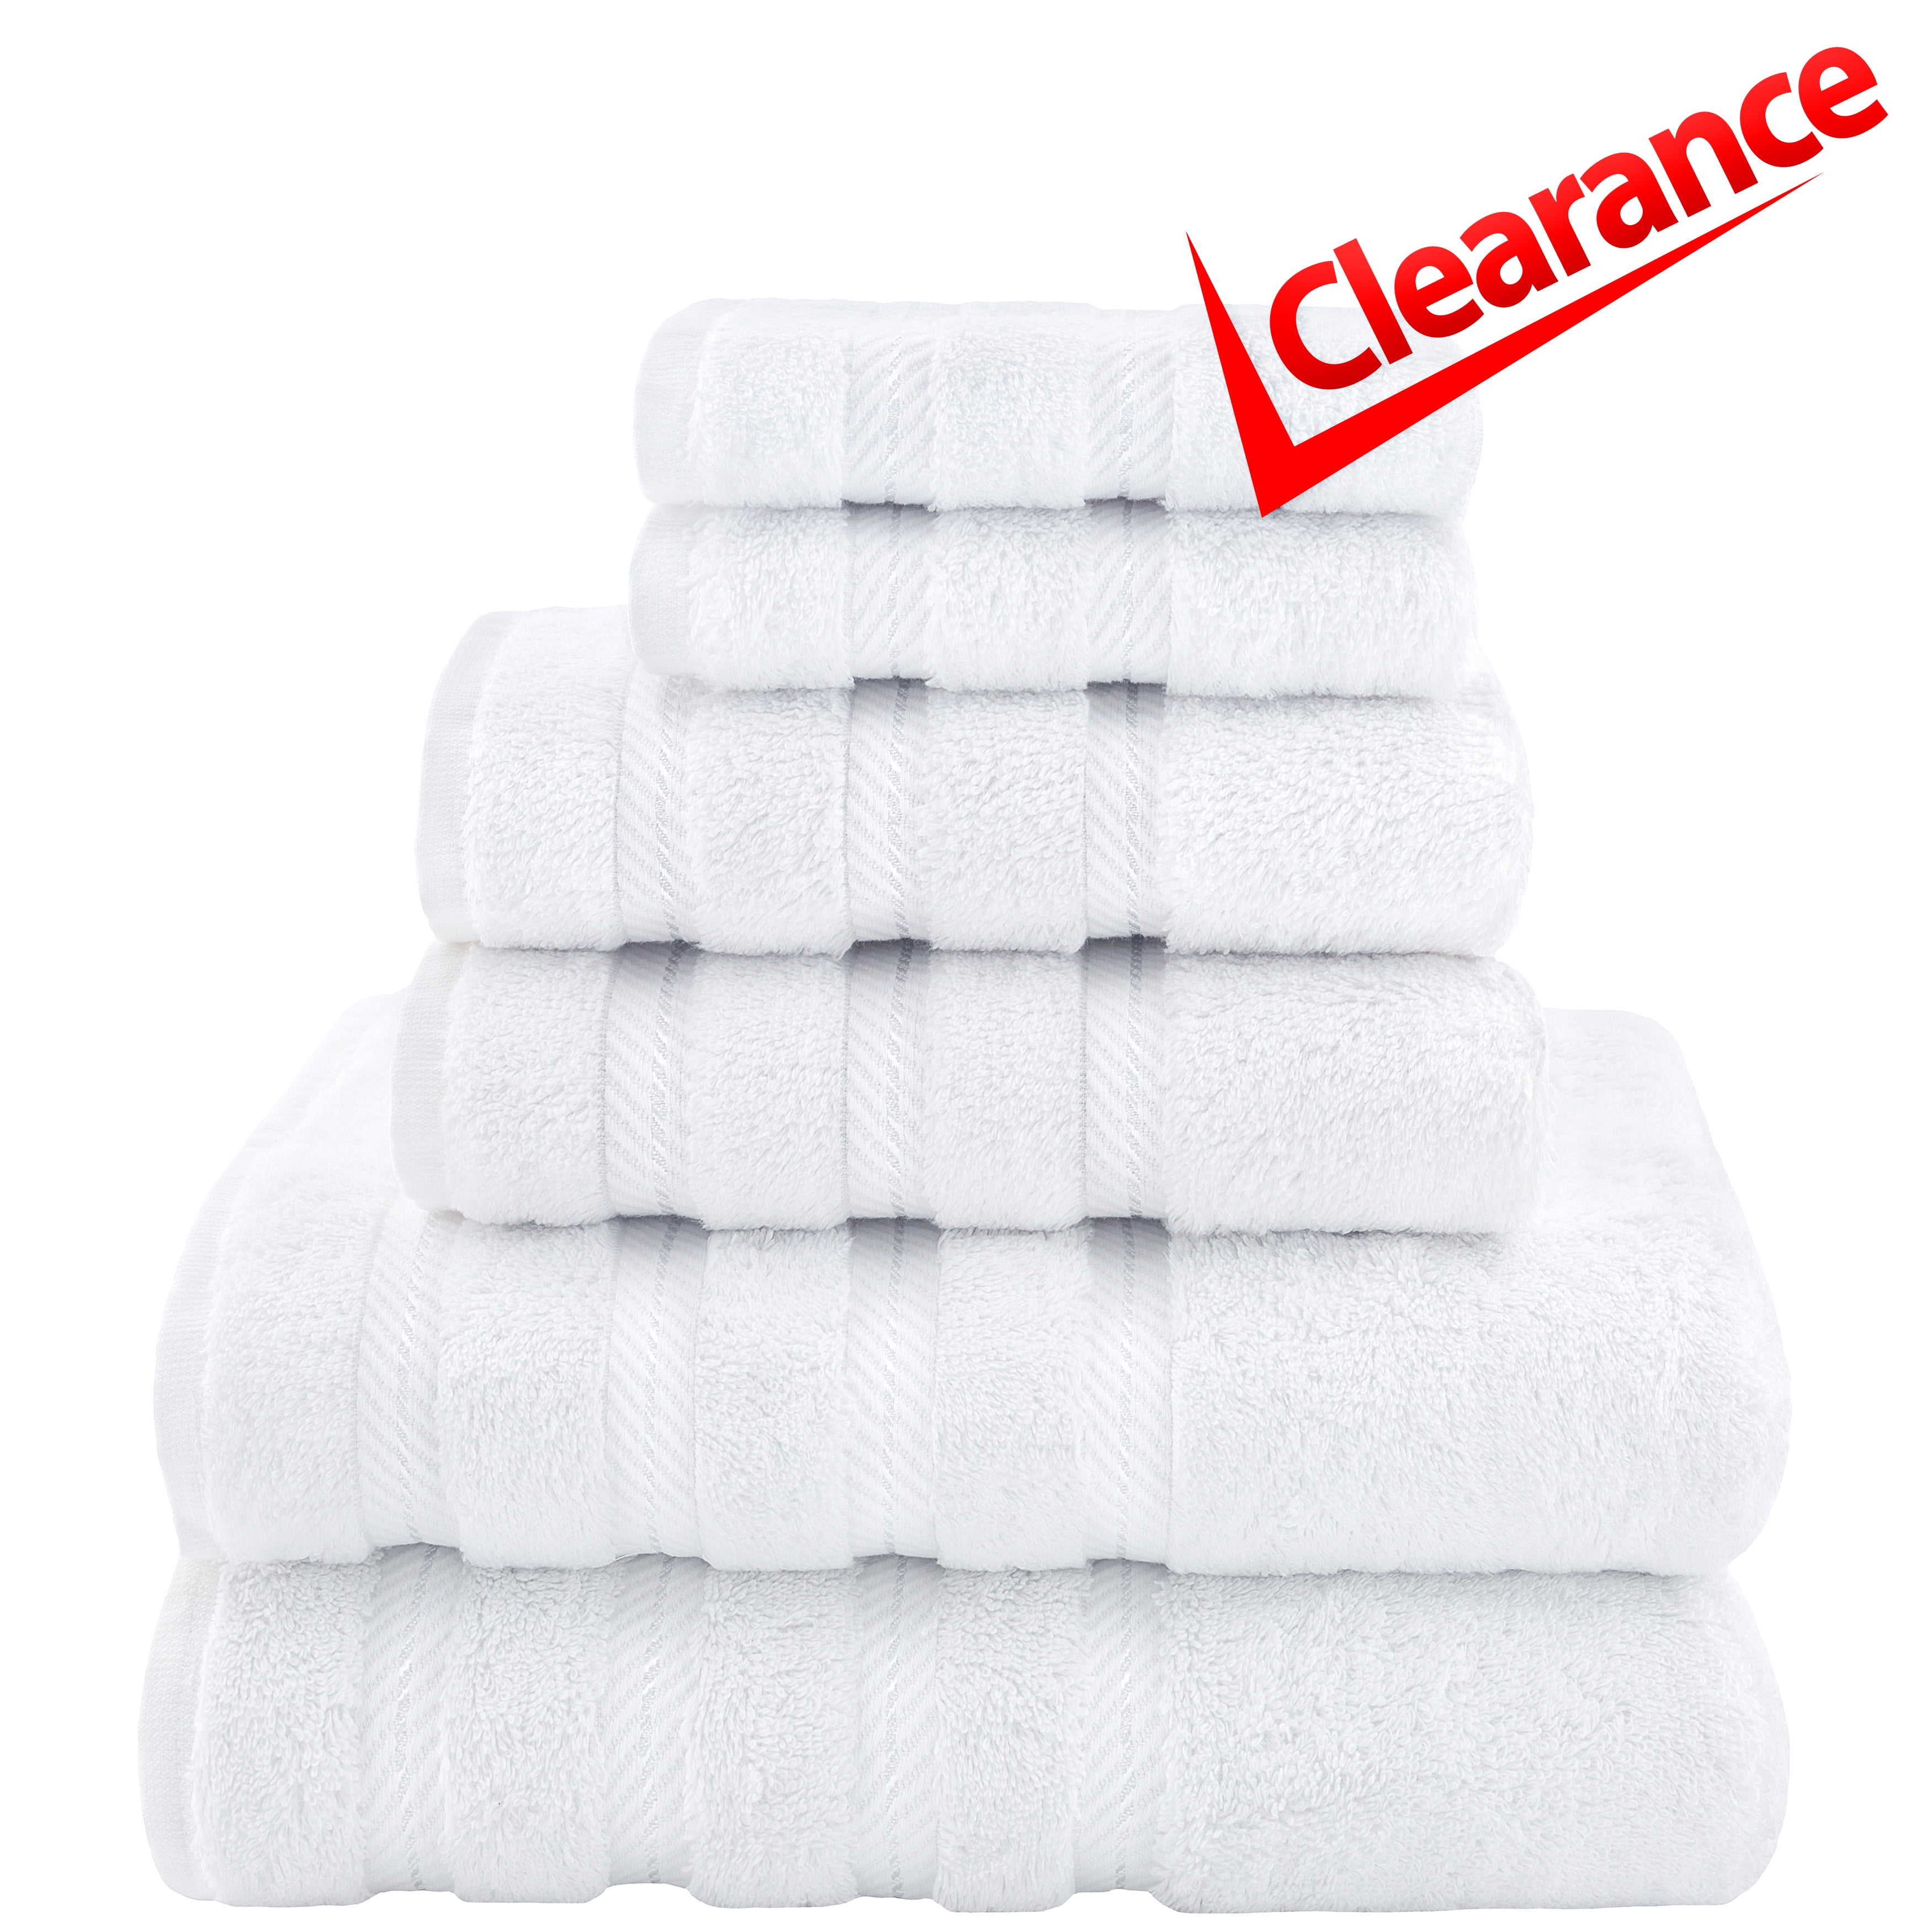 Luxury Hotel and Spa Collection Bath Hand Towels Set of 6 100% Turkish Cotton 